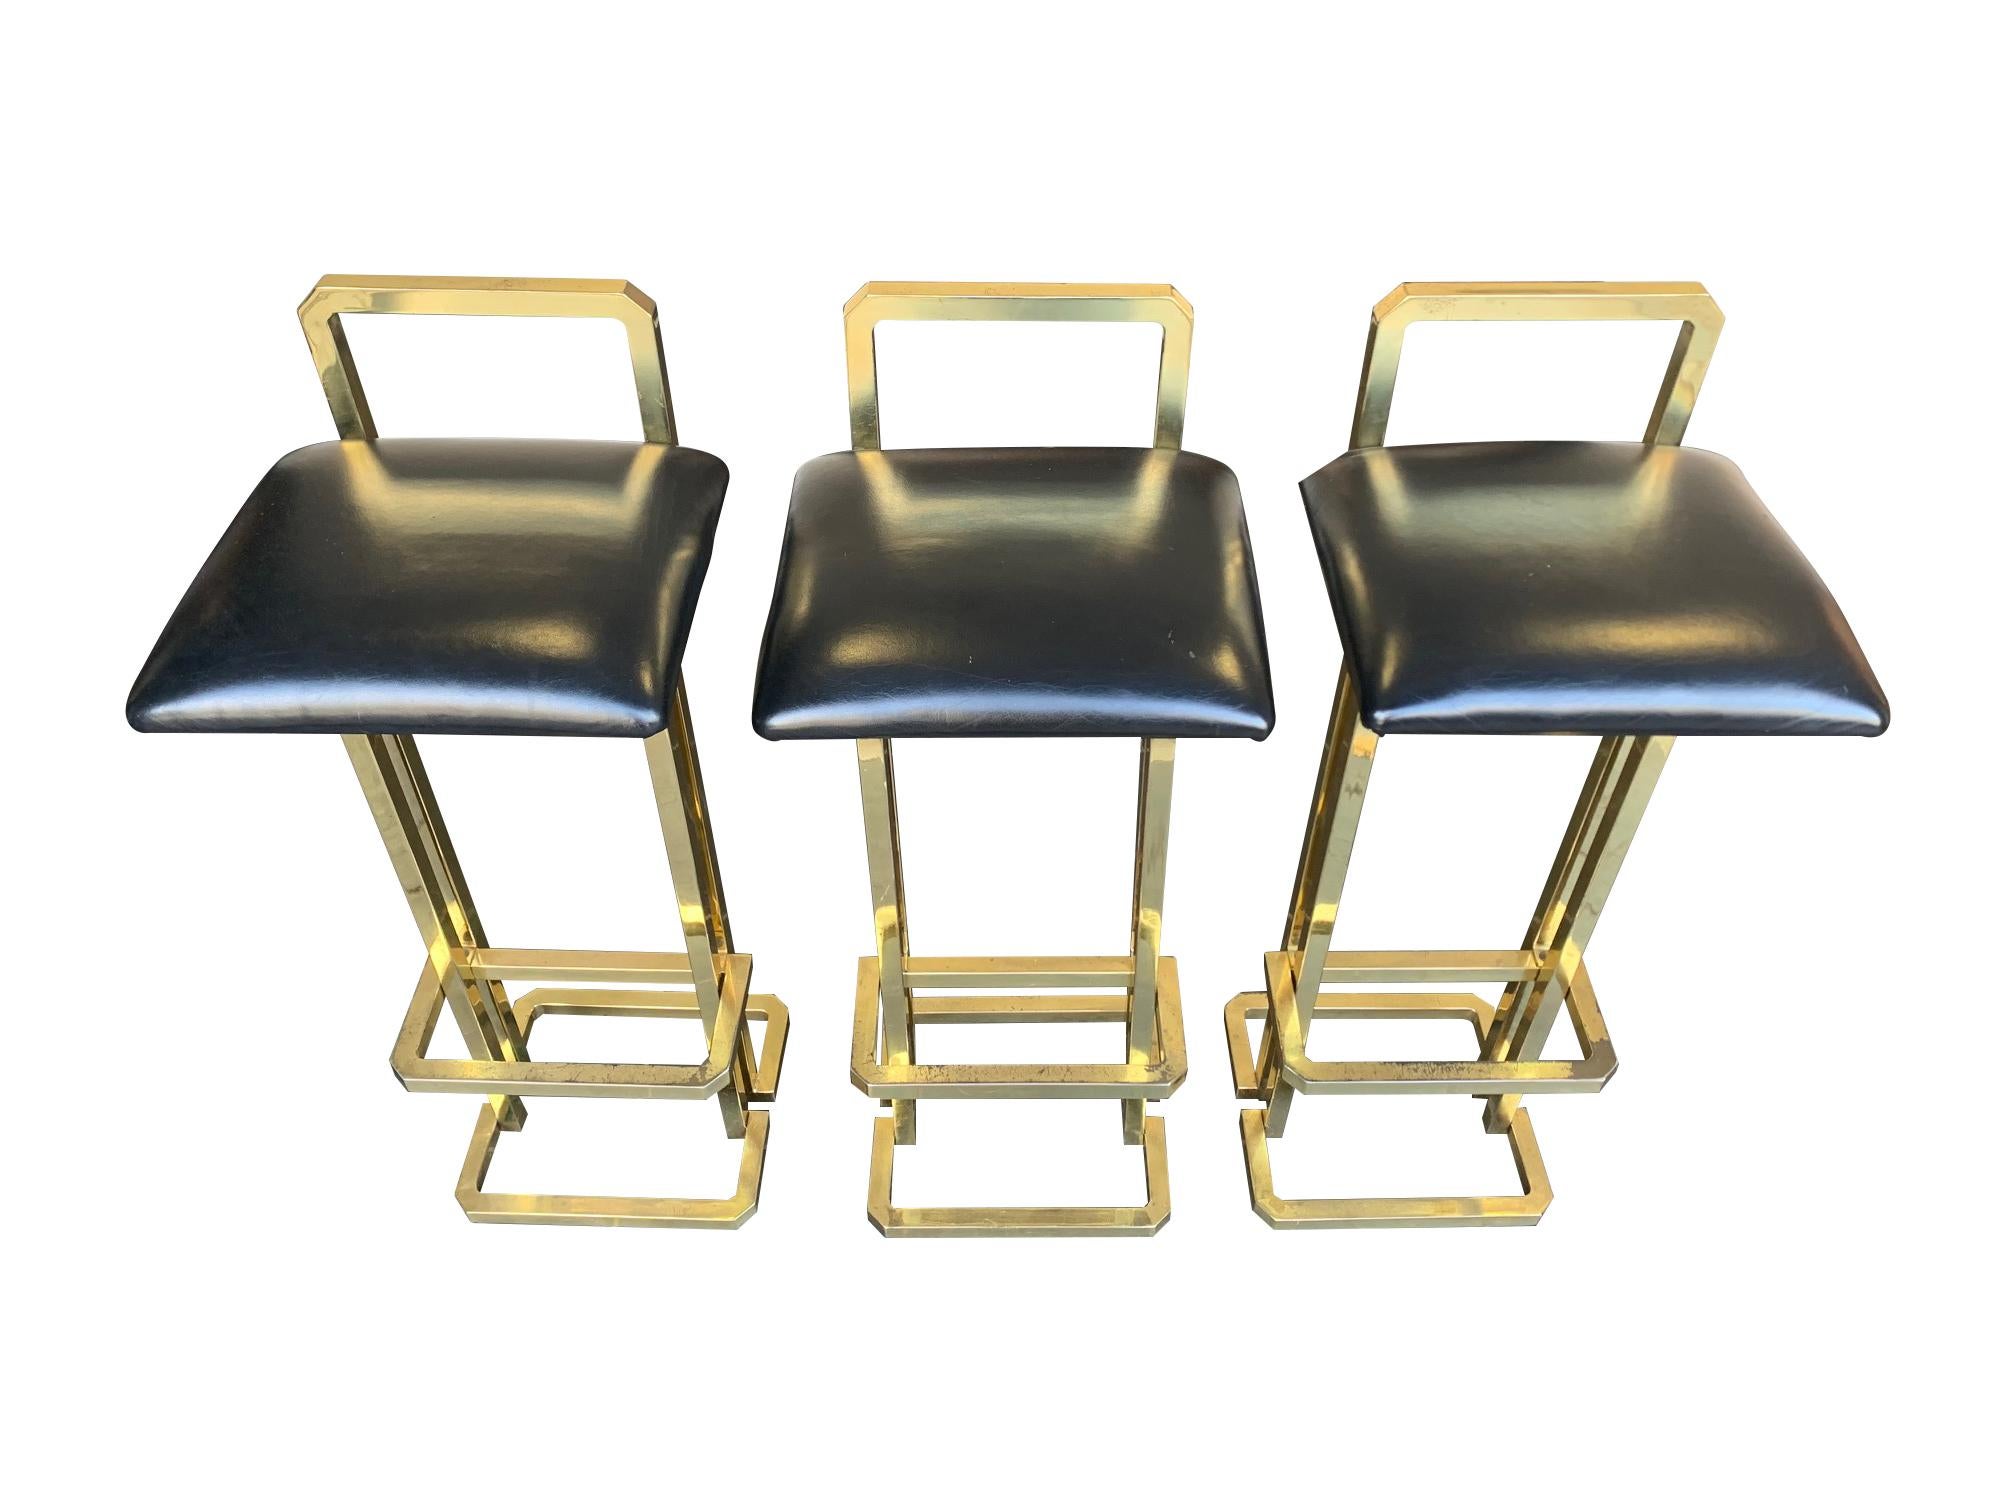 A set of 3 1970s Maison Jansen style gilt metal stools with black leather seat pads, each one has a back and foot rest.